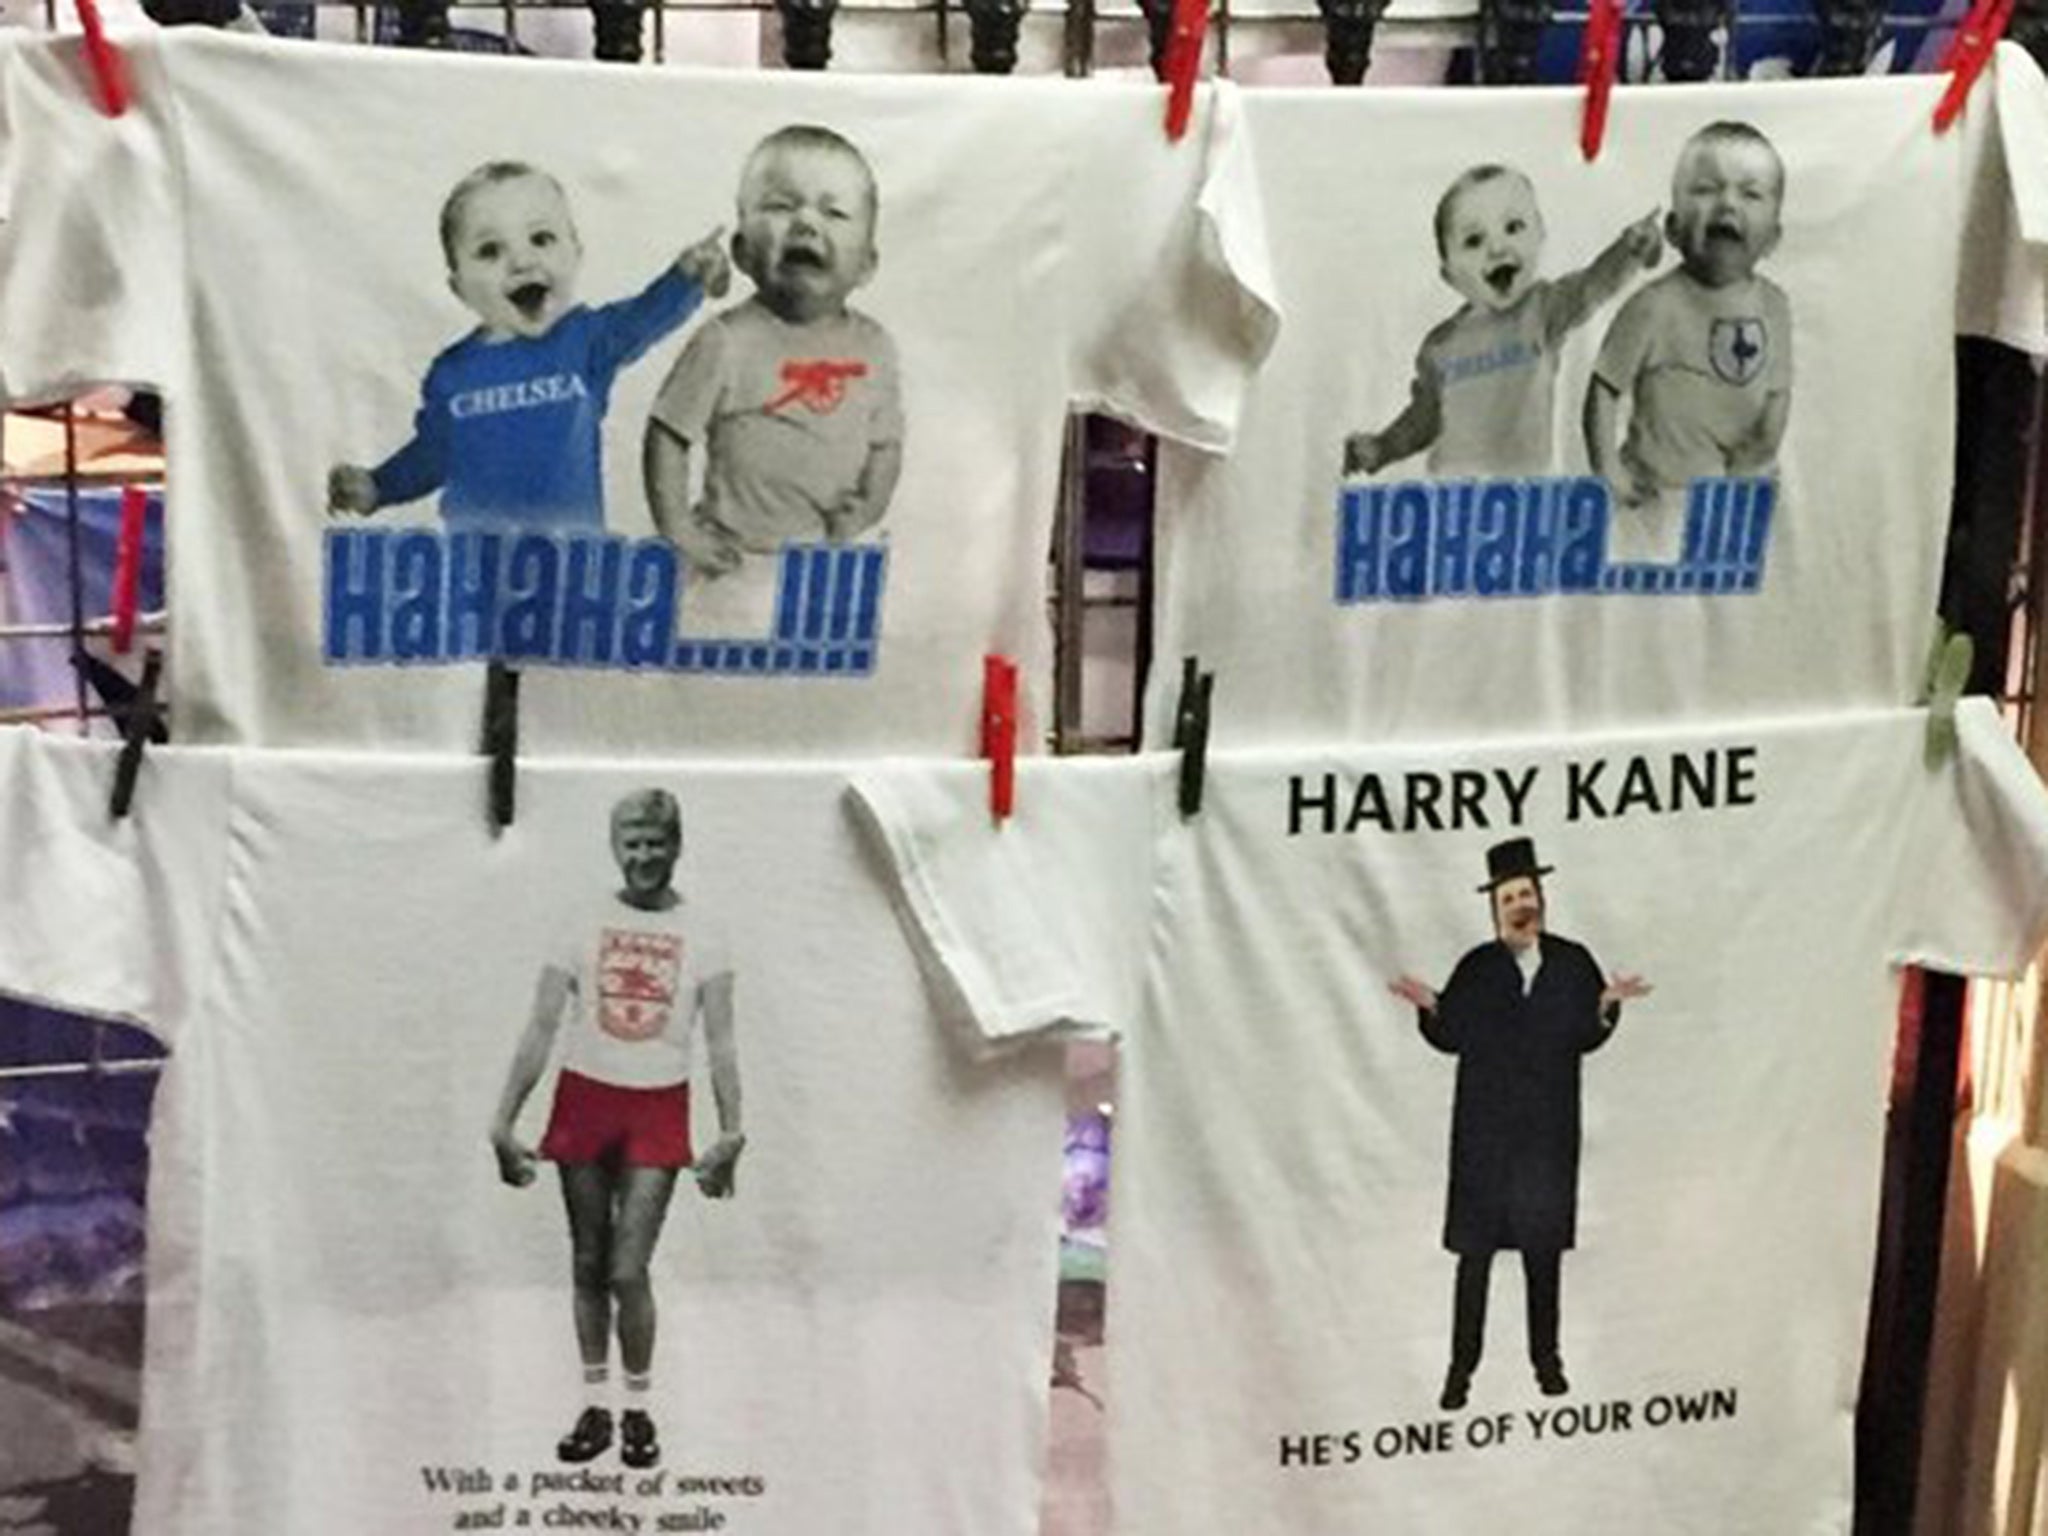 The offensive t-shirts outside Stamford Bridge